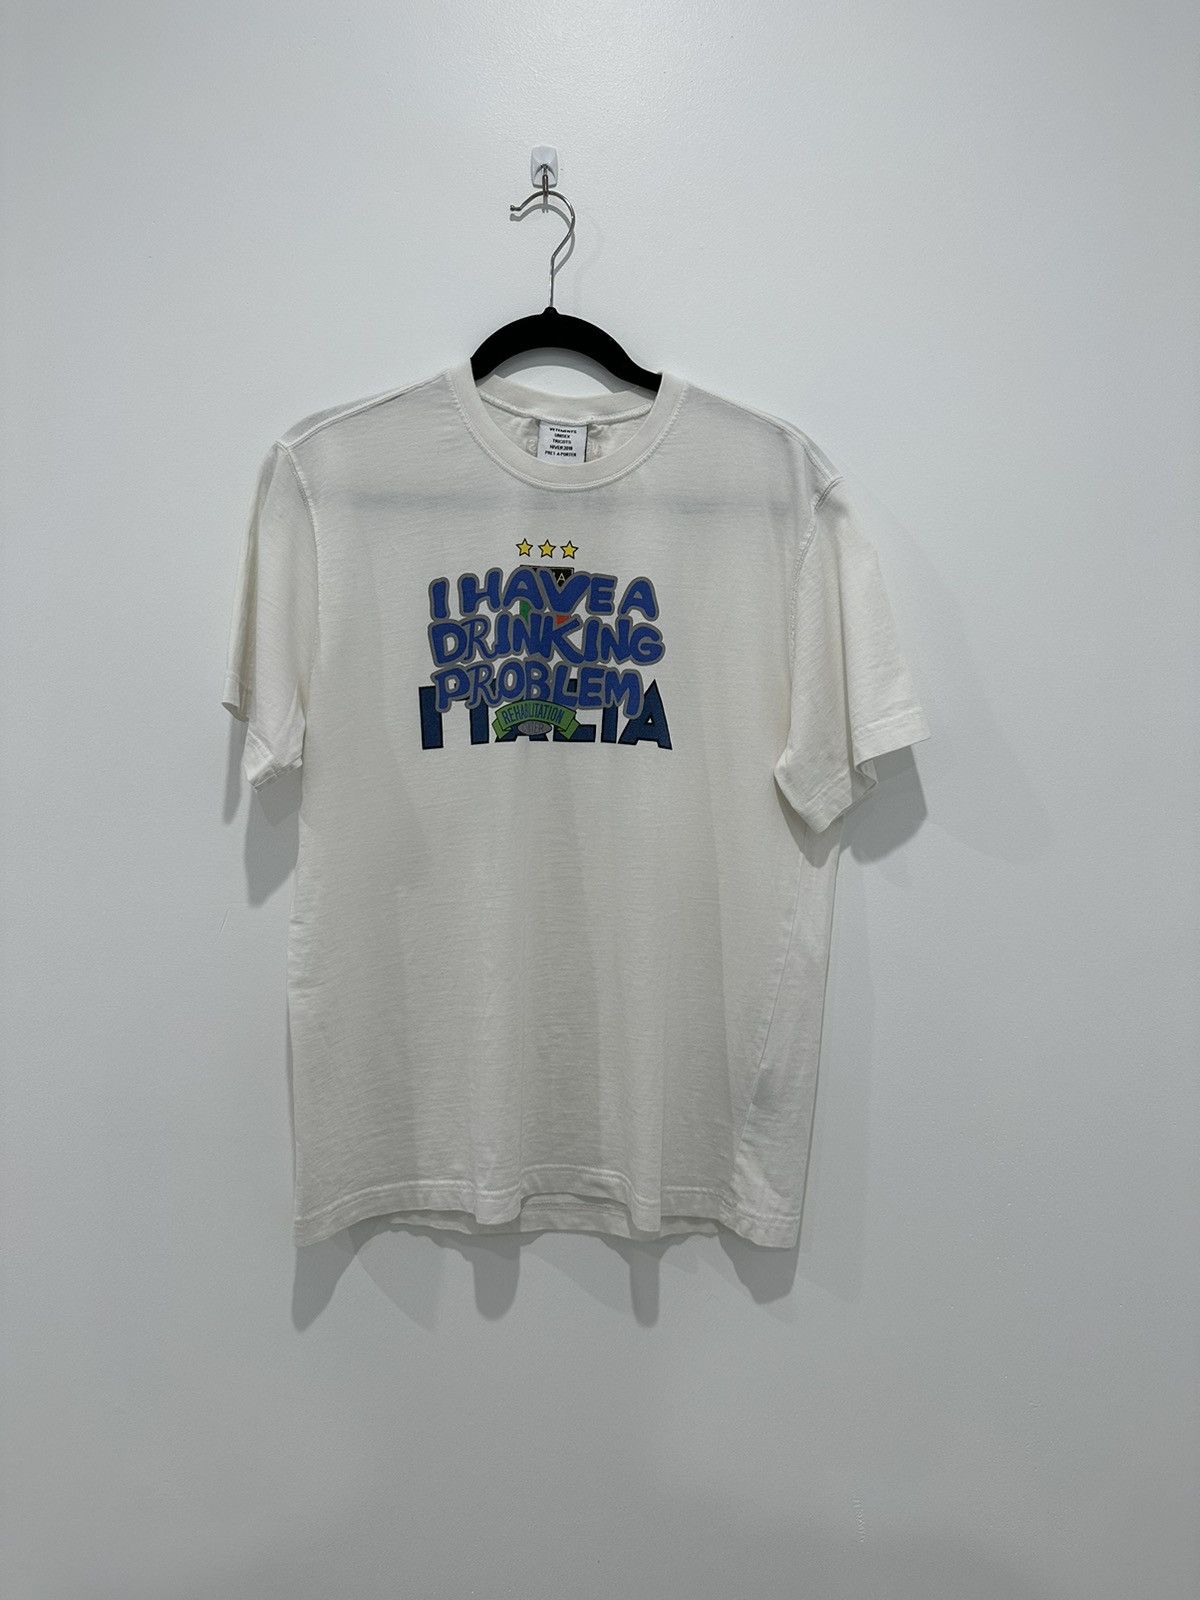 Vetements Vetements I Have a Drinking Problem Shirt | Grailed